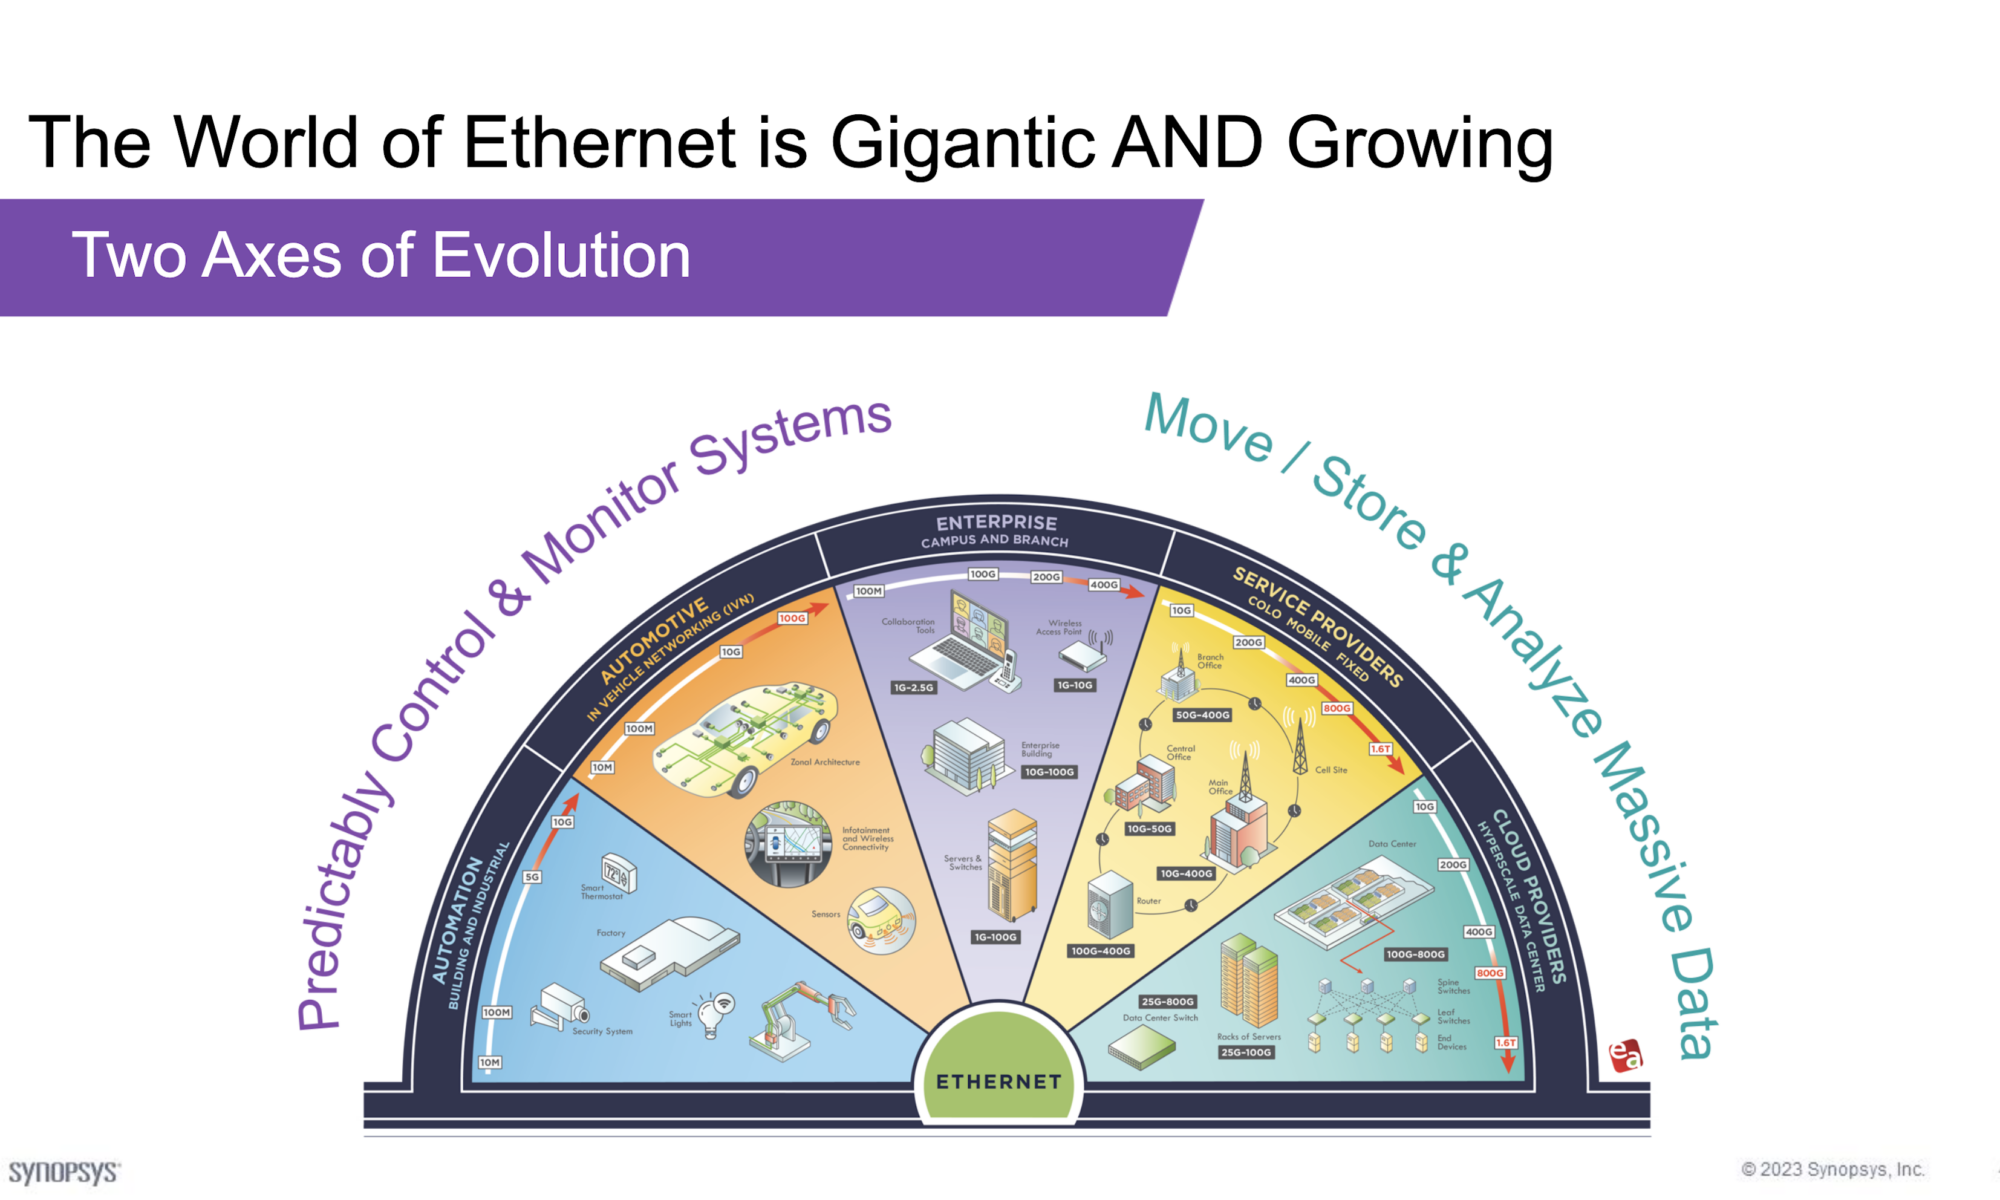 The World of Ethernet is Gigantic and Growing